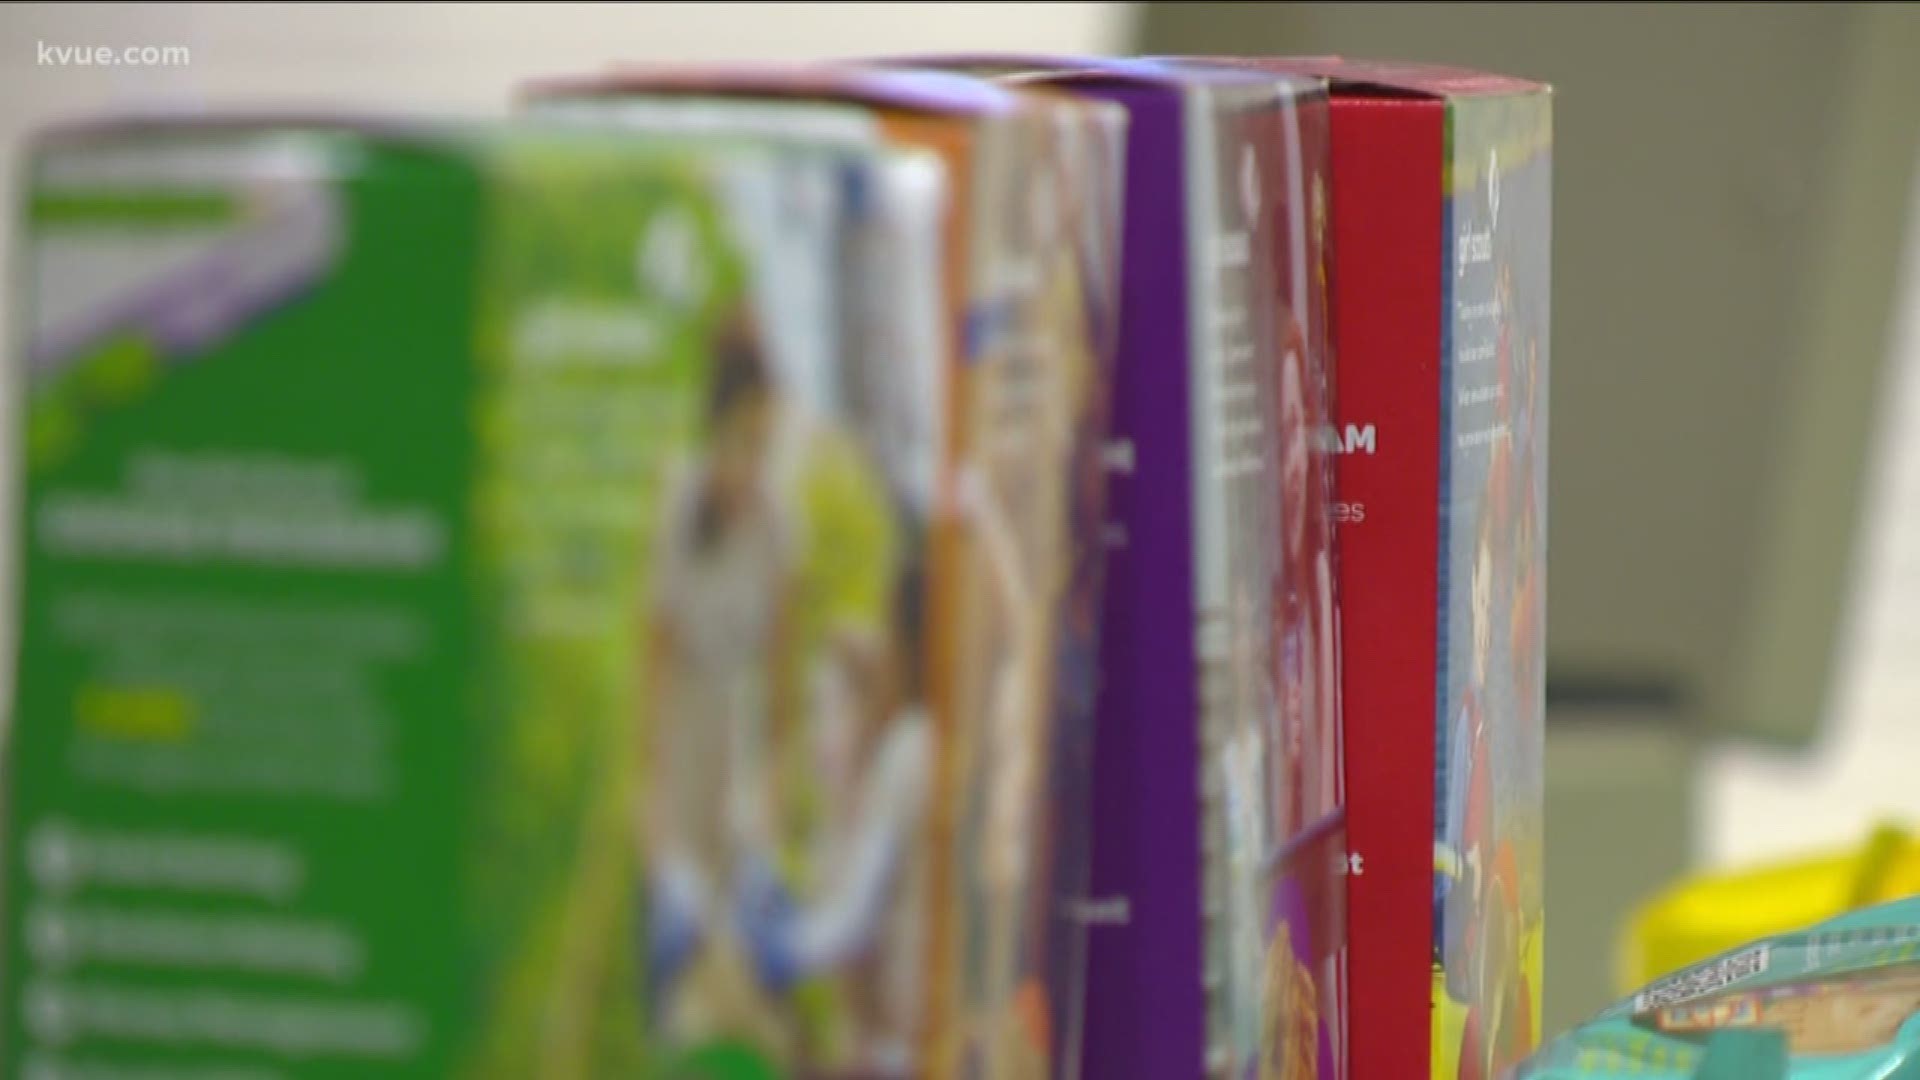 It's almost that time of the year again -- Girl Scout cookie season. And Austin-area troops are getting ready to start selling.